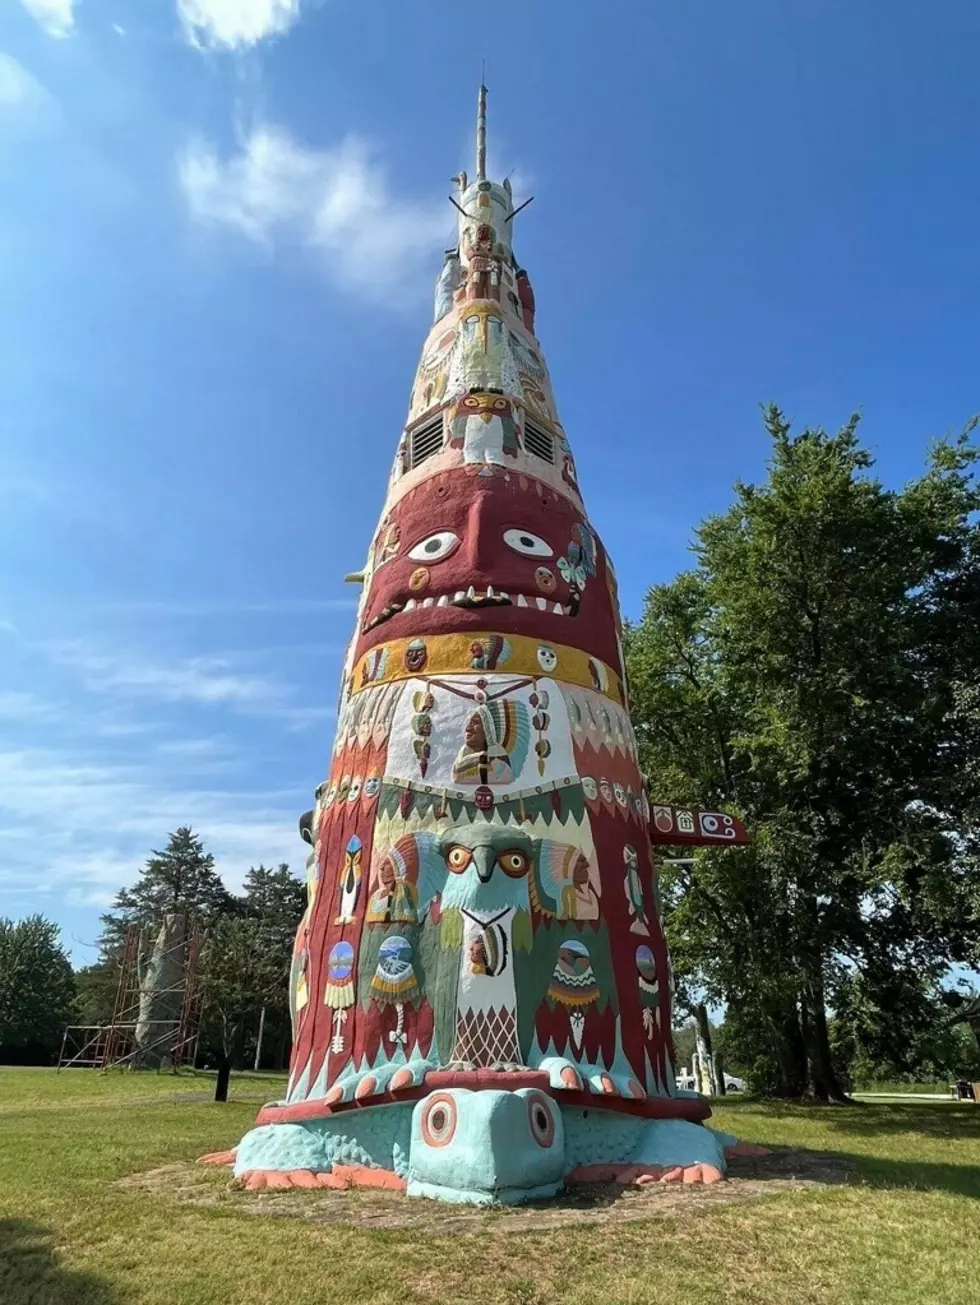 The ‘World’s Largest Totem Pole’ Is An Oklahoma Original